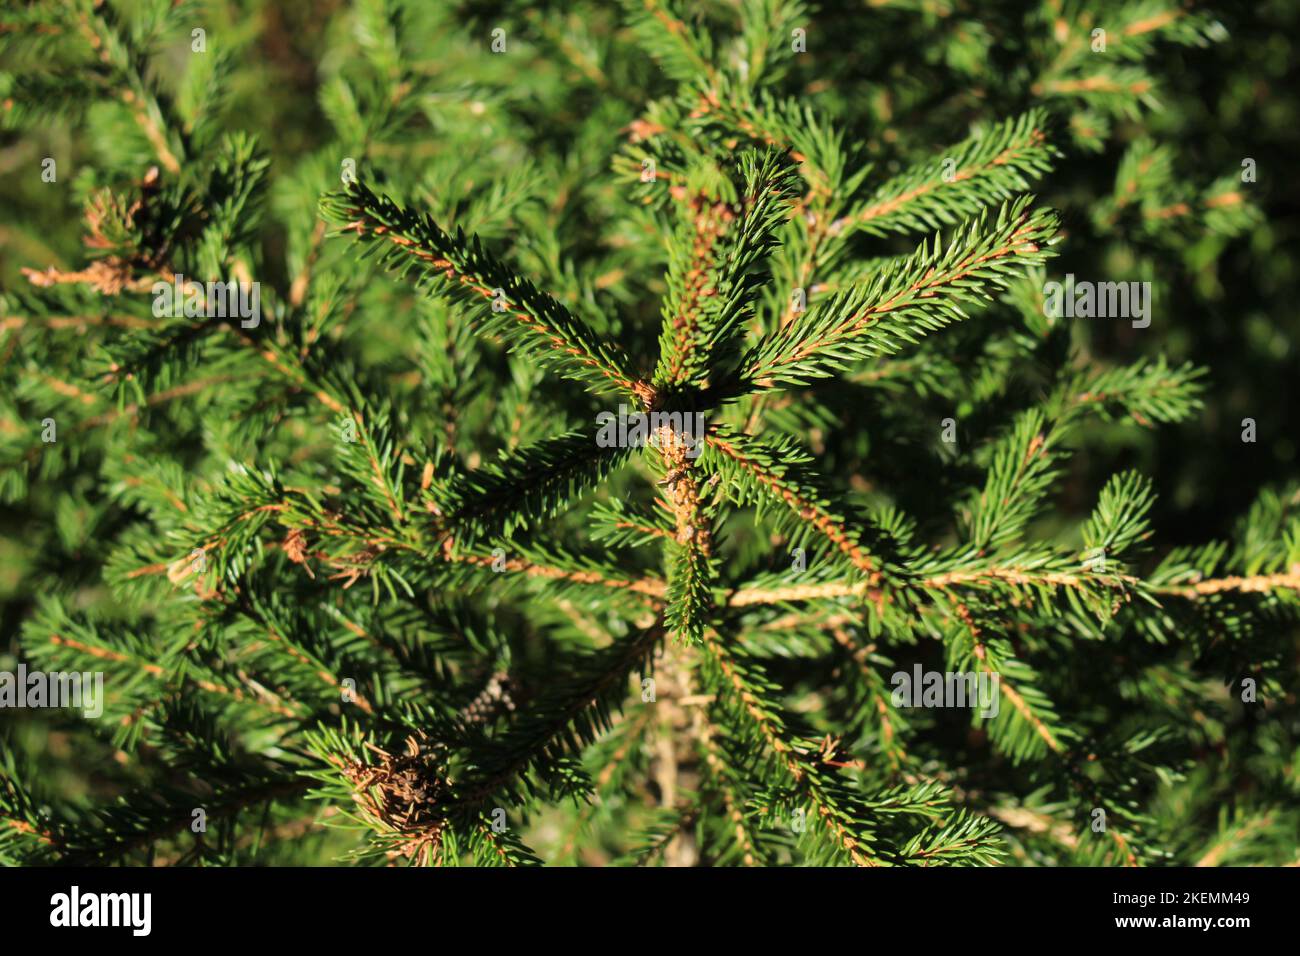 Excellent nature wallpaper, young forest background. Top of young evergreen conifer sapling with other young spruces in blurred background. Stock Photo